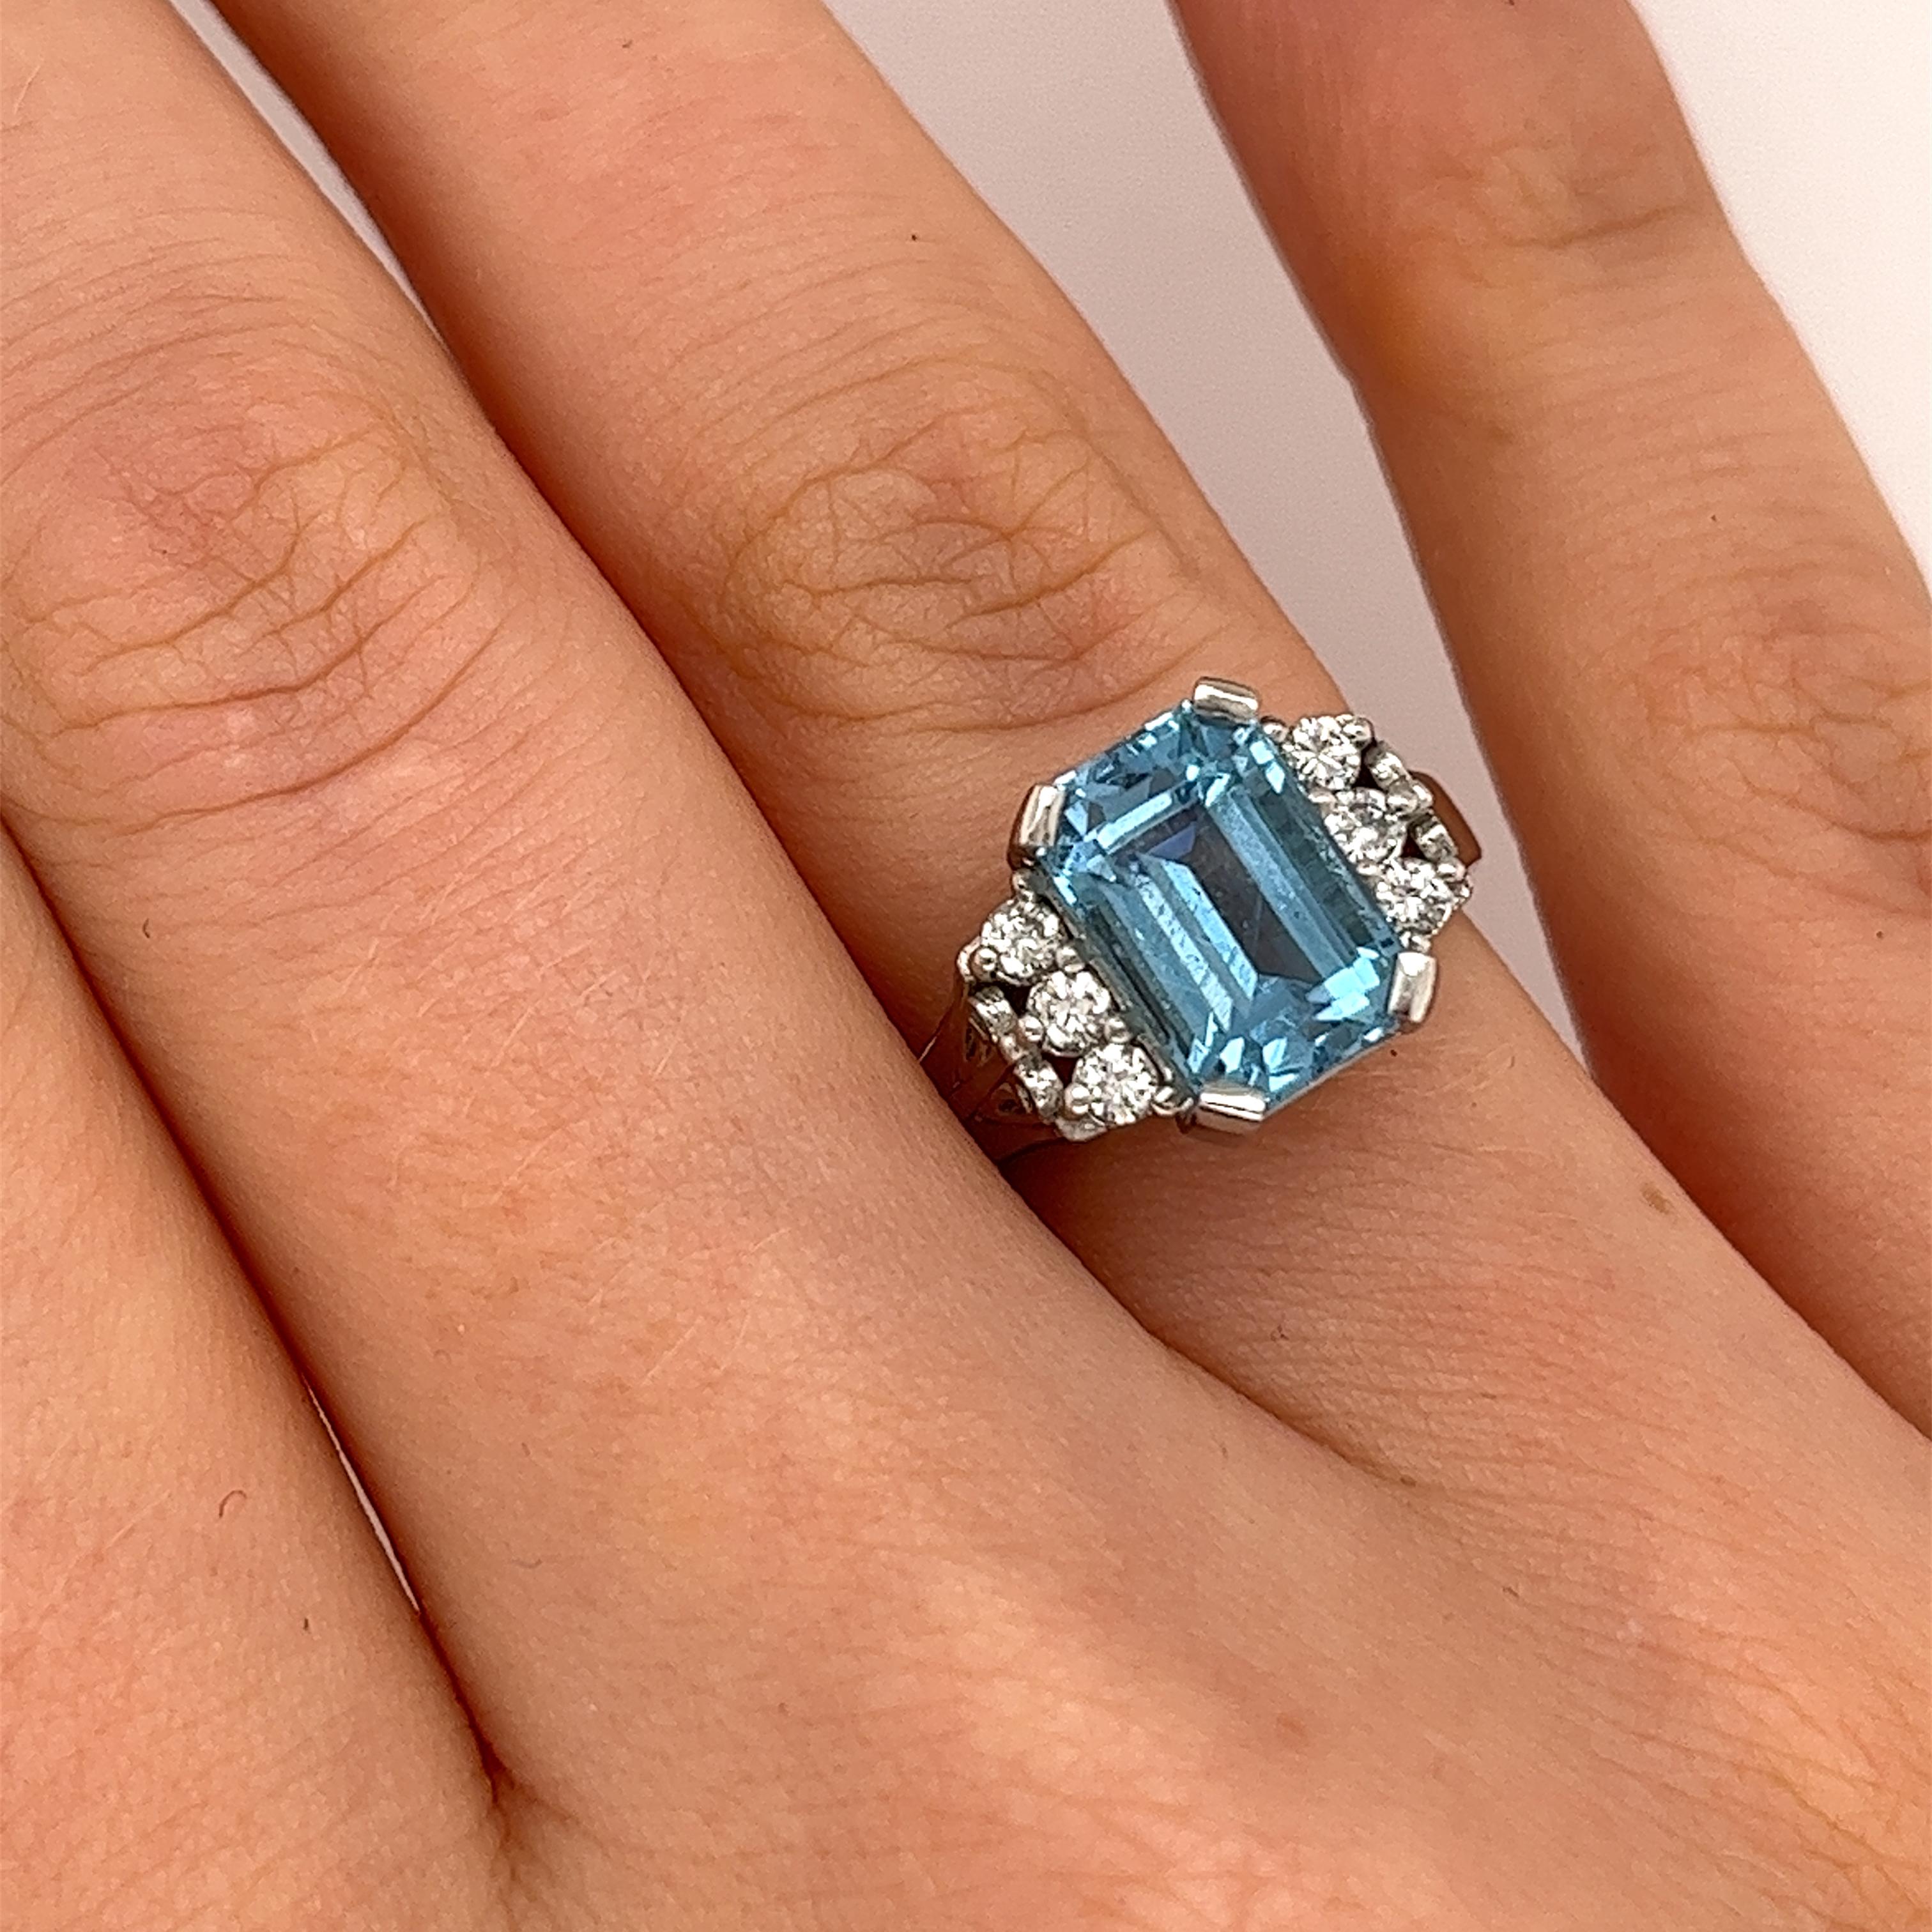 Women's Triple AAA Emerald Cut 3.10ct Aquamarine Ring w/ 3 Diamonds on Sides in Platinum For Sale